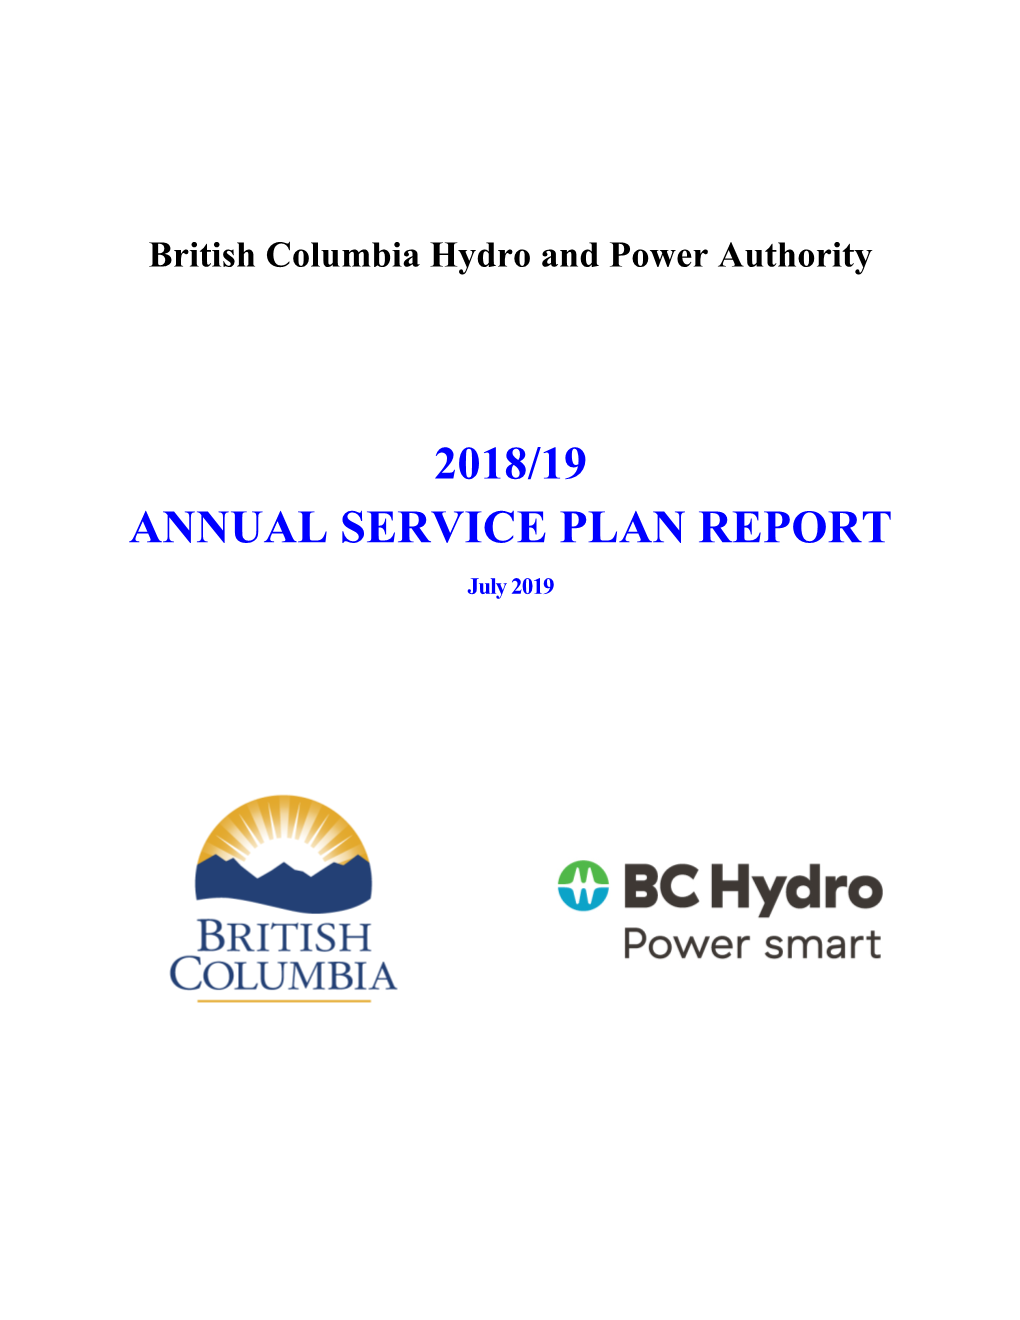 2018/19 ANNUAL SERVICE PLAN REPORT July 2019 for More Information on BC Hydro Contact